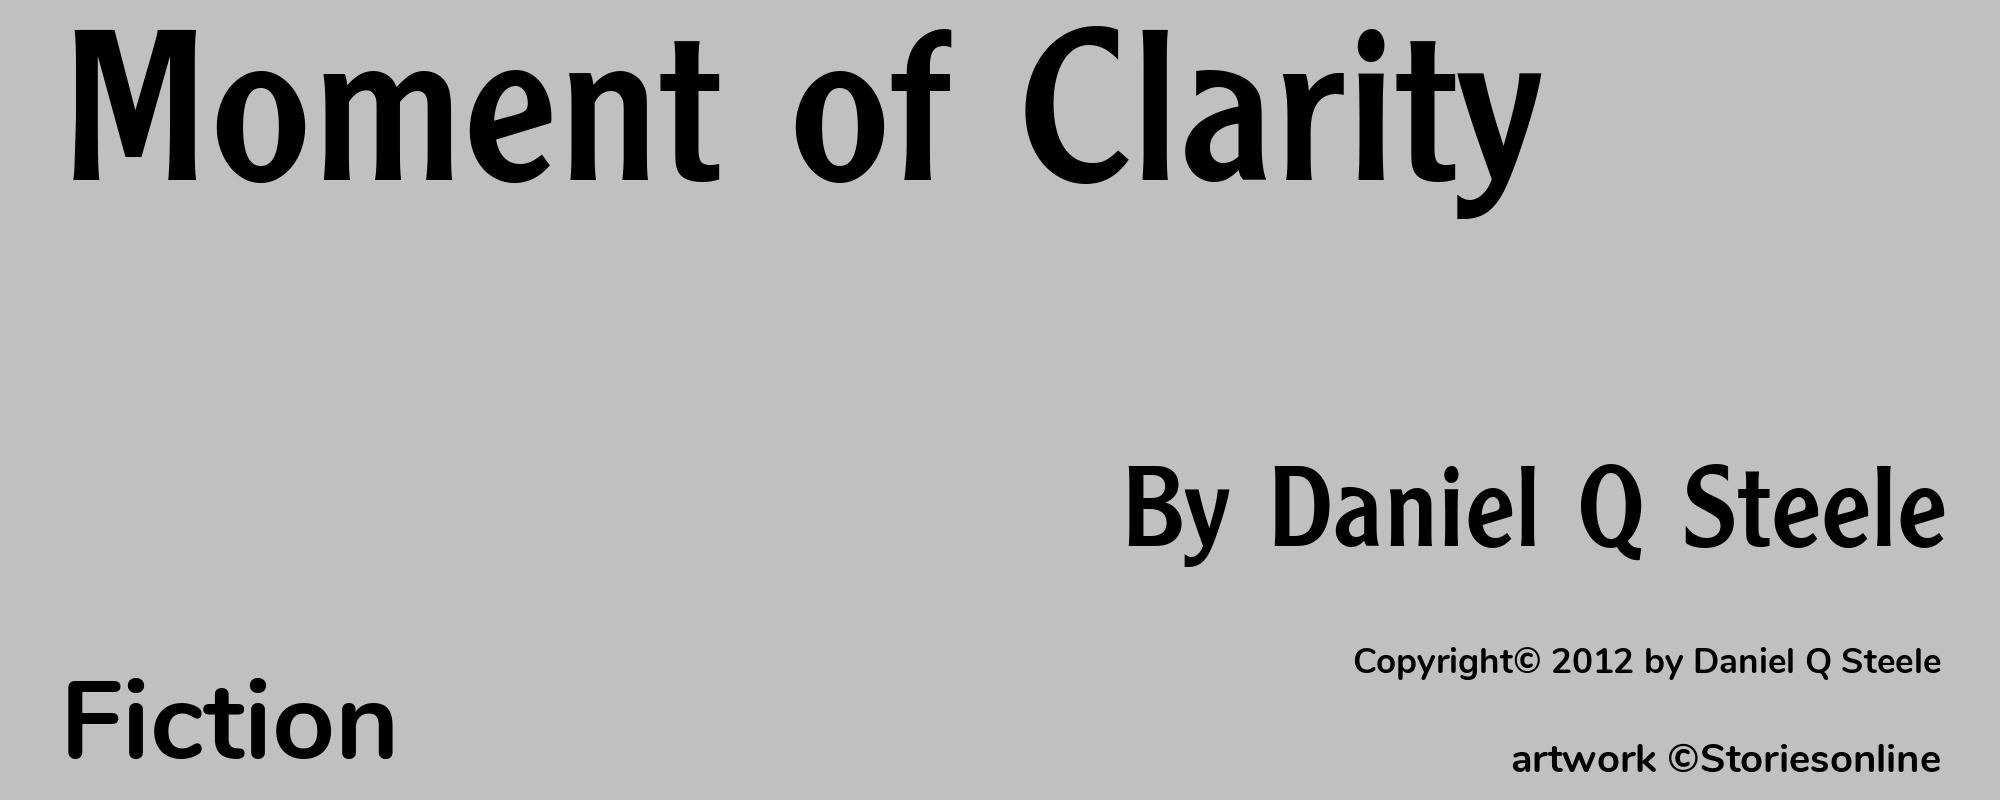 Moment of Clarity - Cover